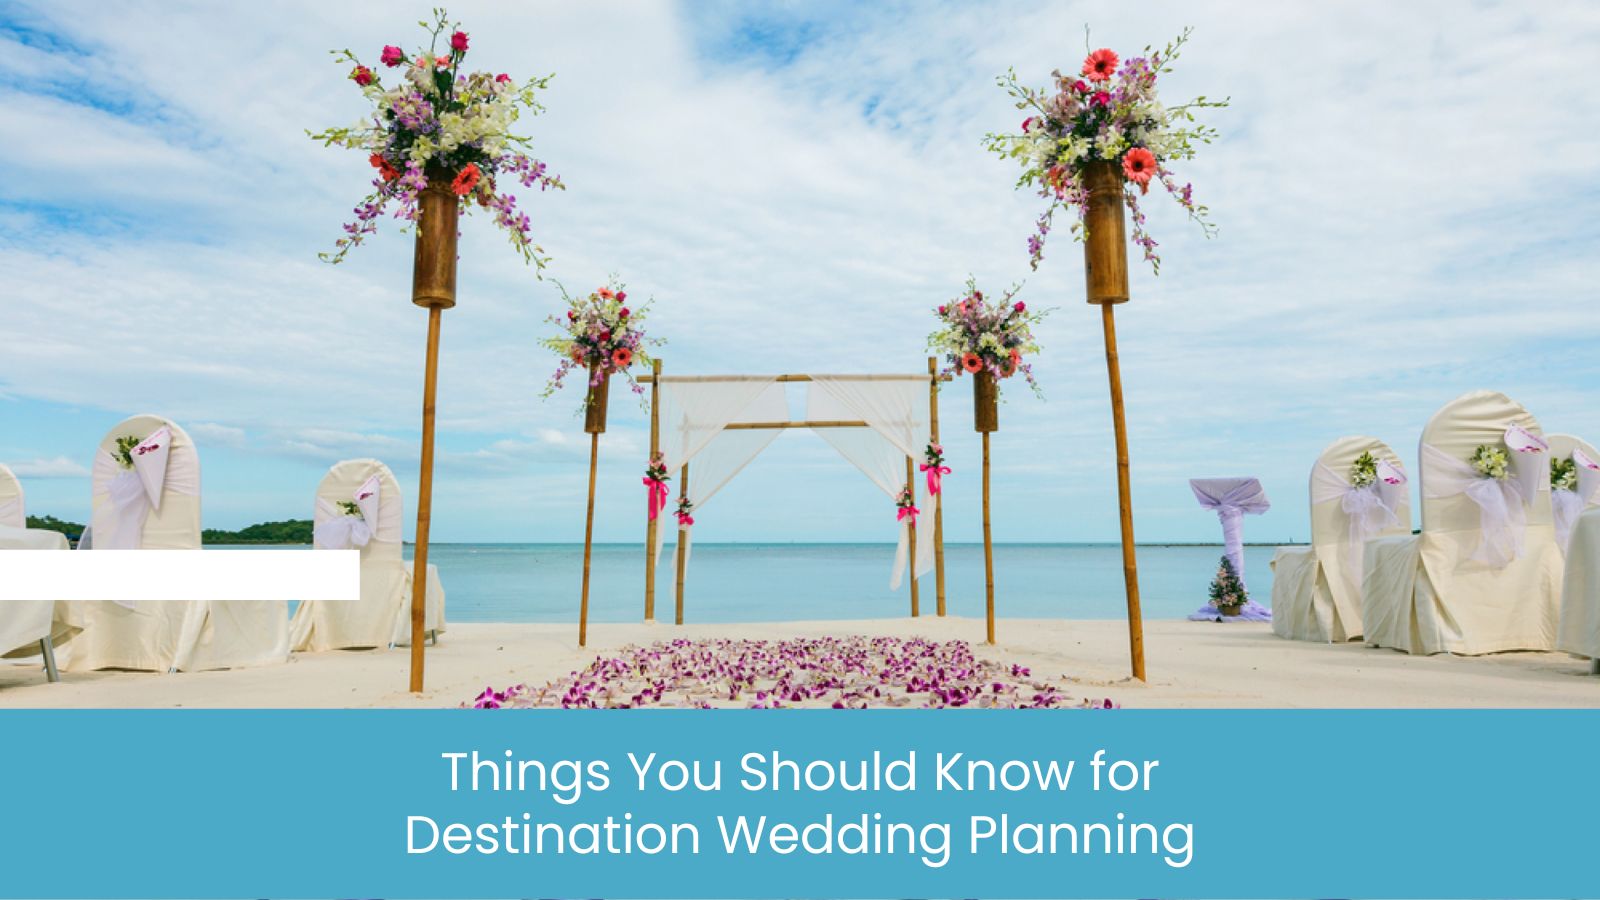 Things You Should Know for Destination Wedding Planning